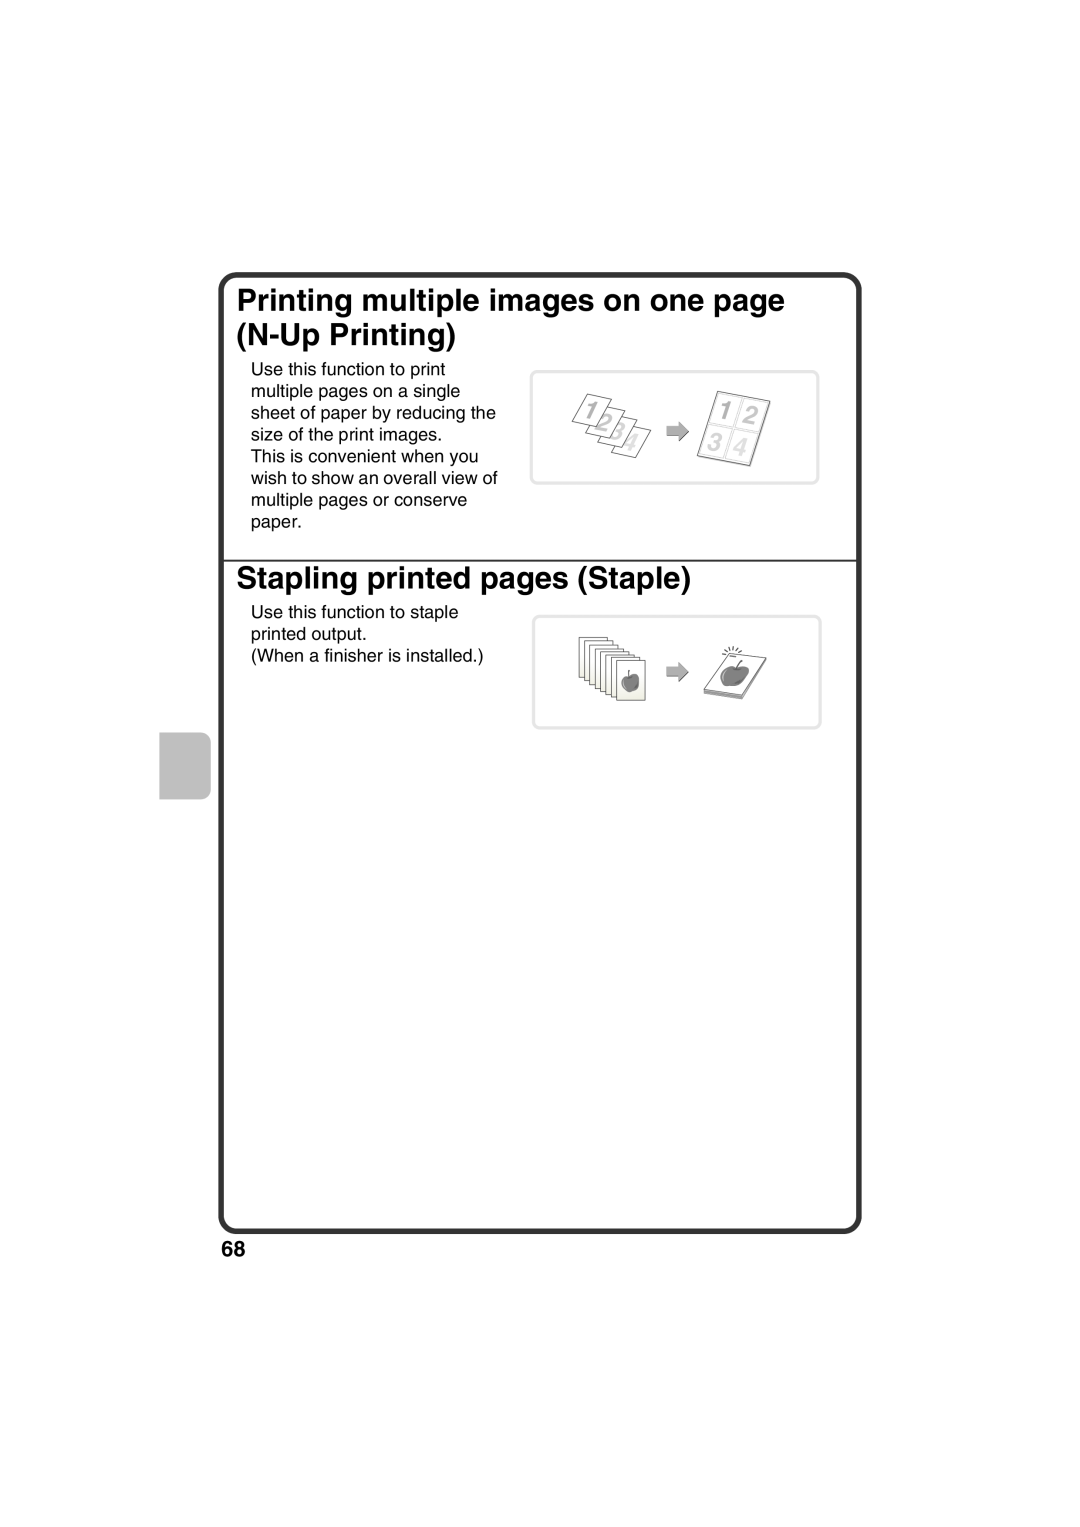 Sharp MX-B401, TINSE4377FCZZ quick start Printing multiple images on one page N-Up Printing, Stapling printed pages Staple 